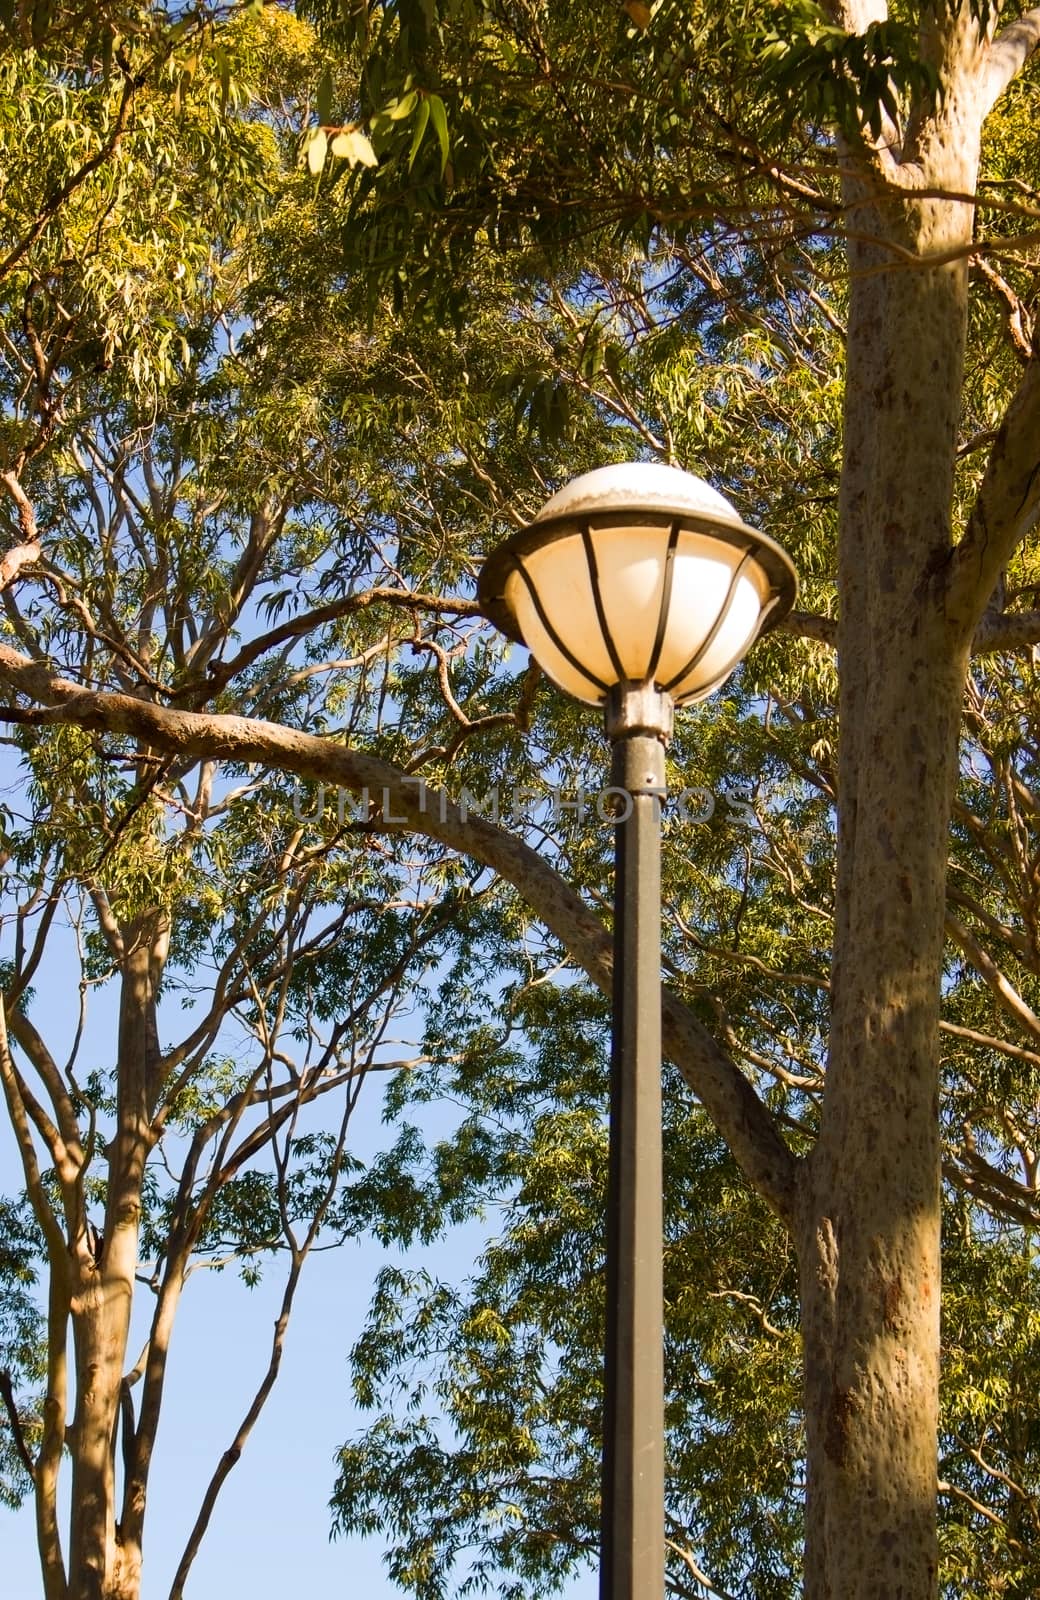 Vertical shot of ball shaped street light with trees in background